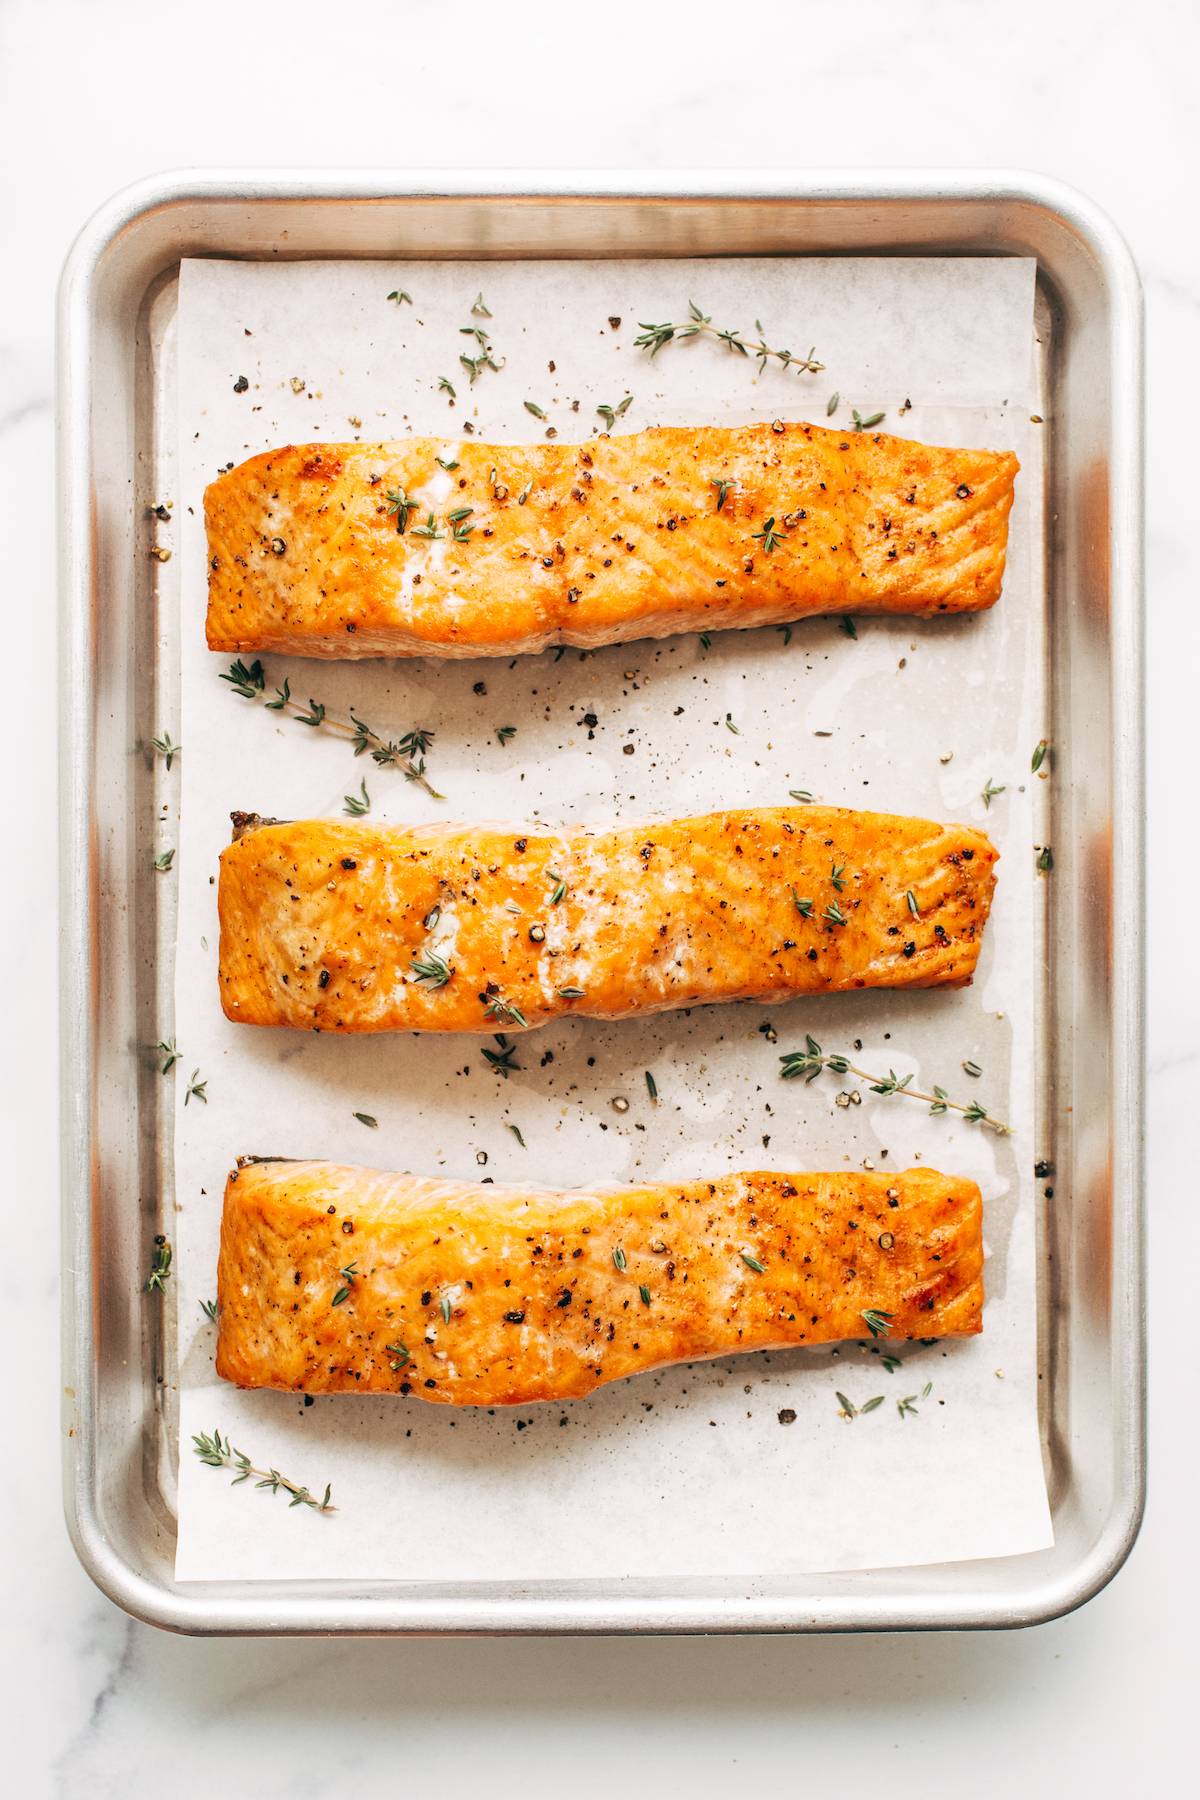 Three fillets of salmon baked on a sheet pan.